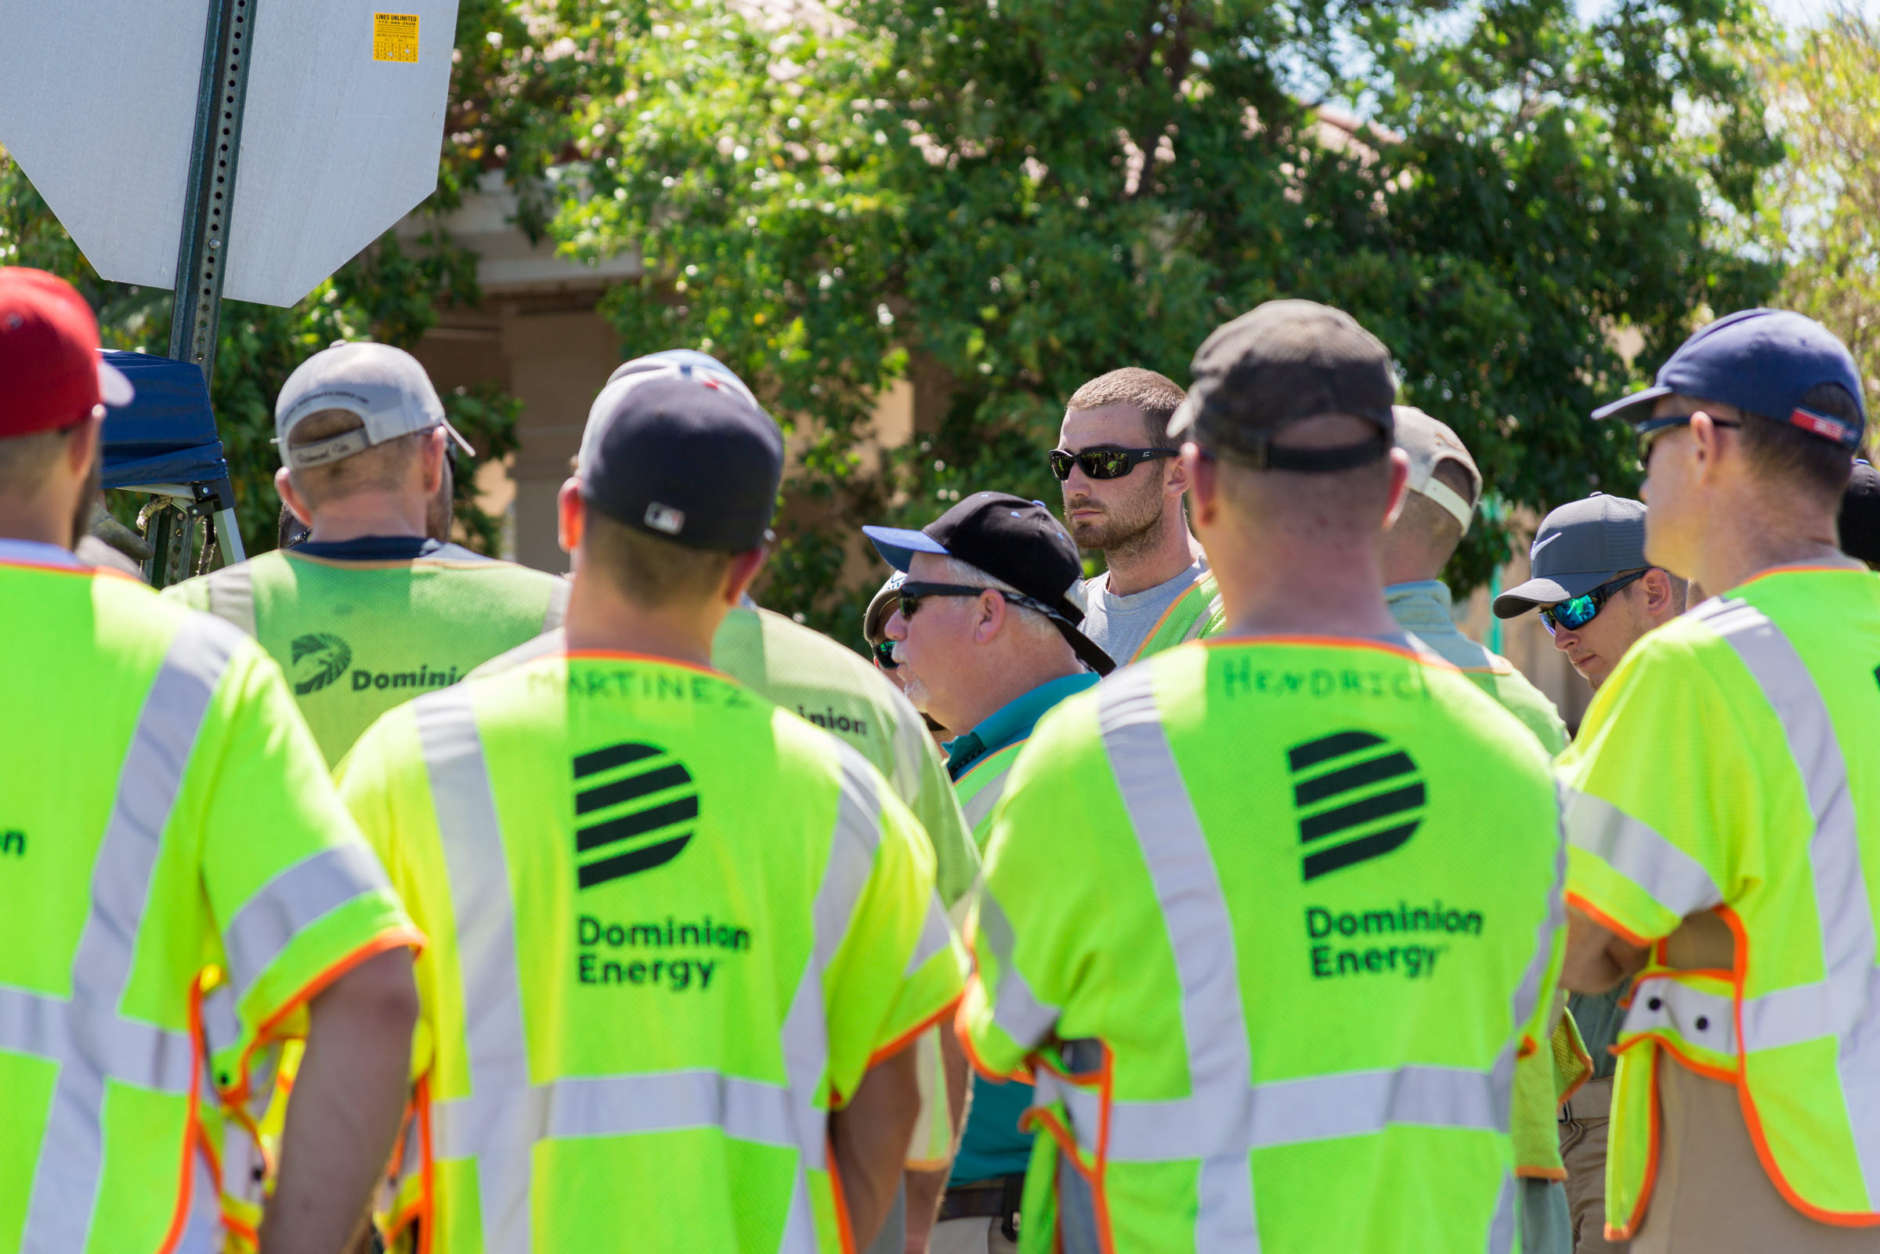 One week after Hurricane Irma blasted through Florida, Virginia-based utility crews are helping return power to the Sunshine State. (Courtesy Dominion Energy) 